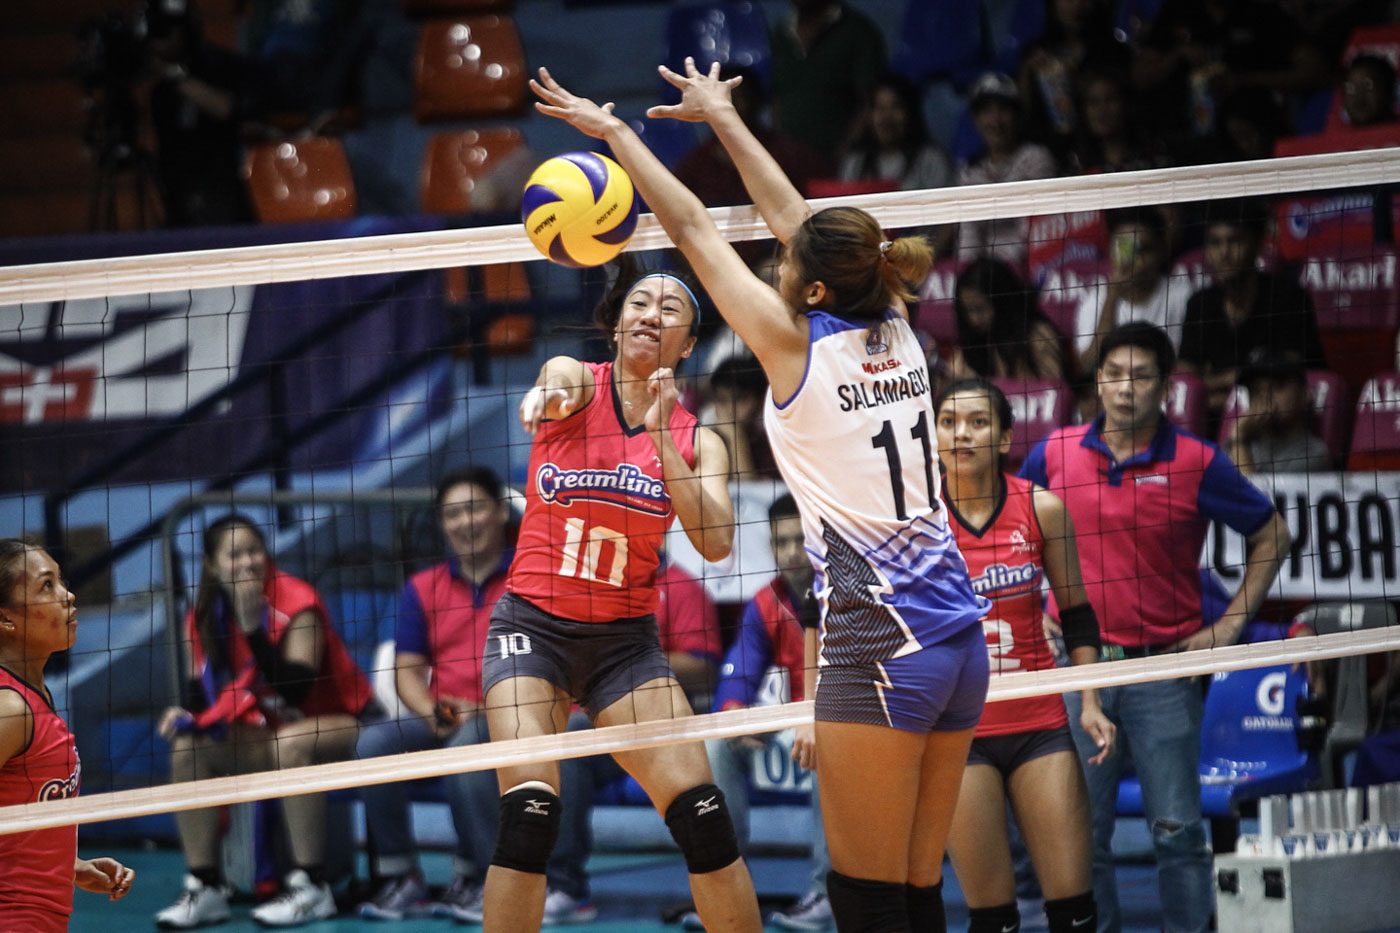 Creamline completes first-round sweep; Army ends dry spell